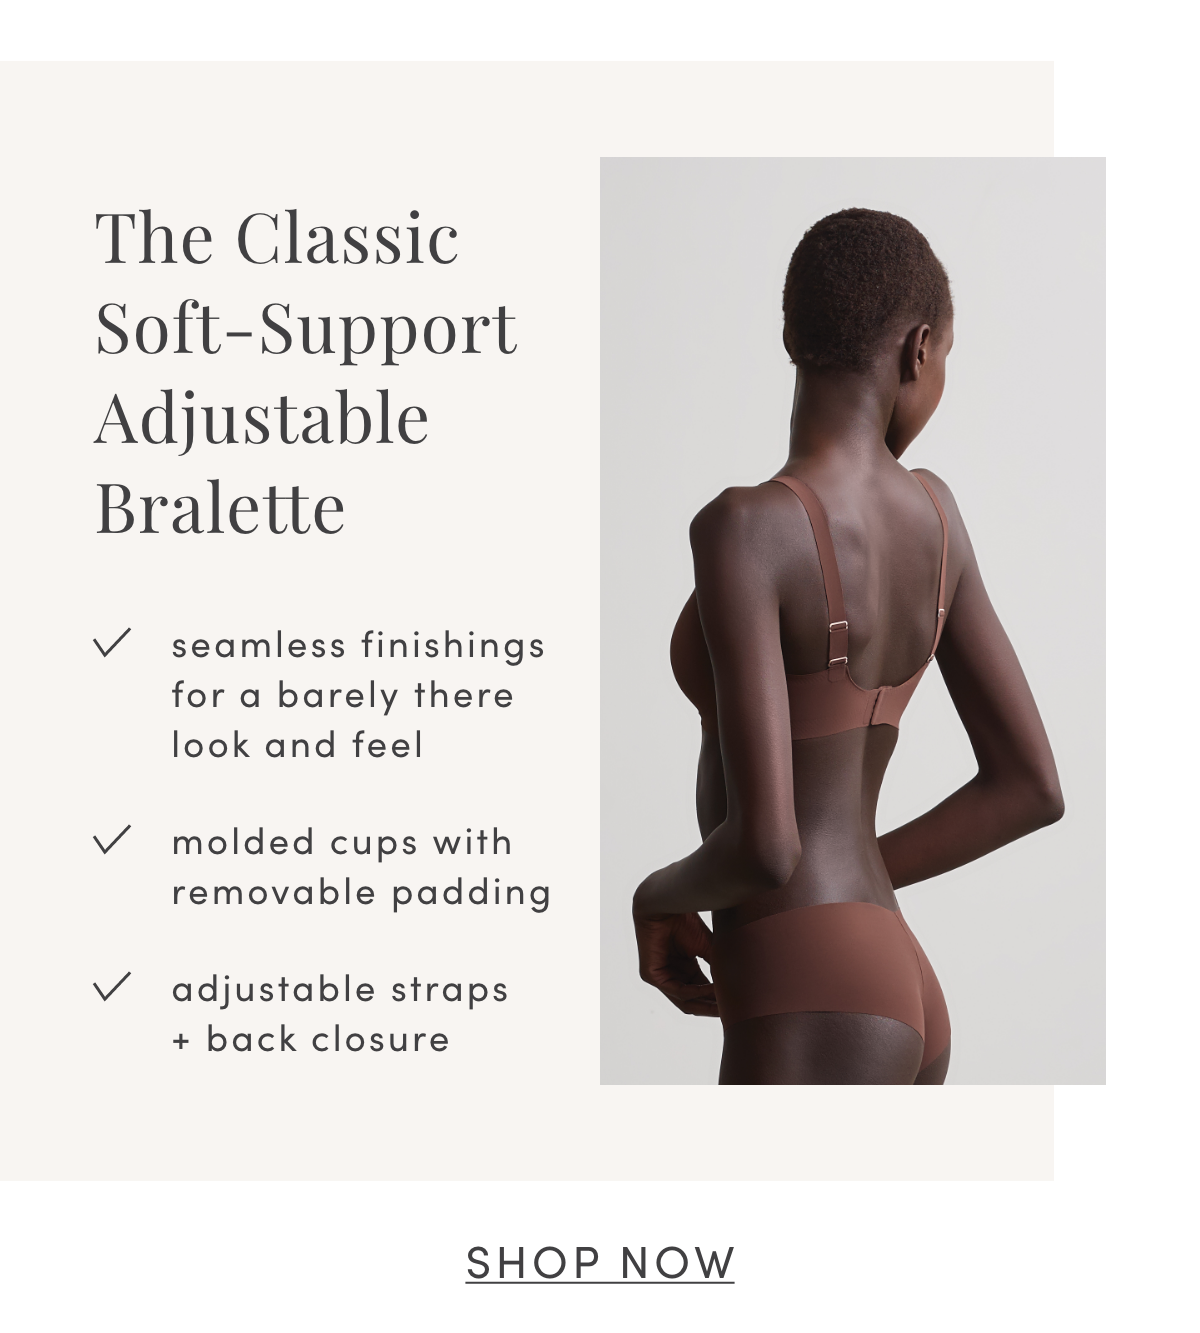 The Classic Soft-Support Adjustable Bralette